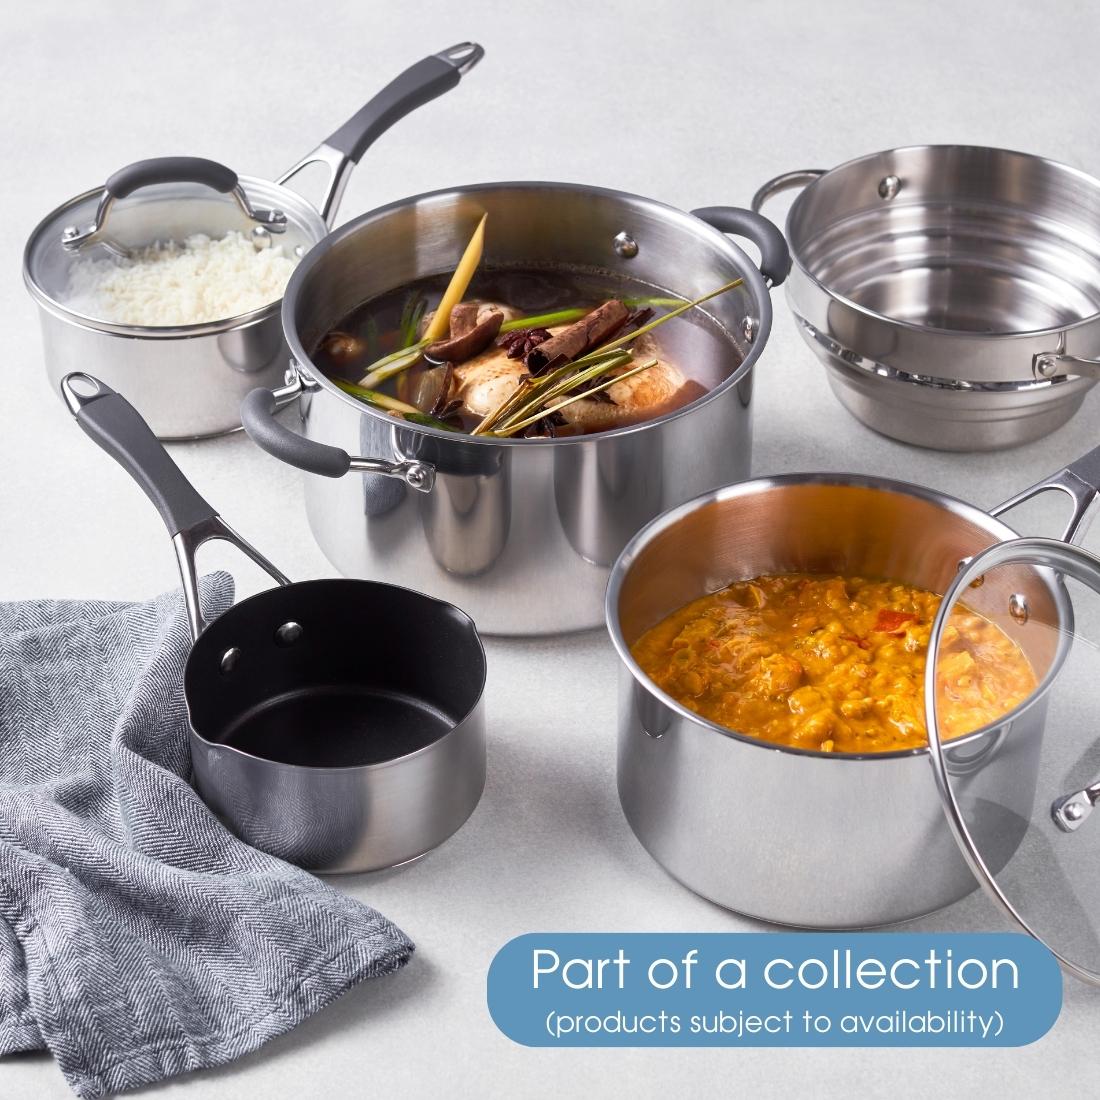 RACO Reliance Stainless Steel/Nonstick Induction 7 Piece Cookware Set